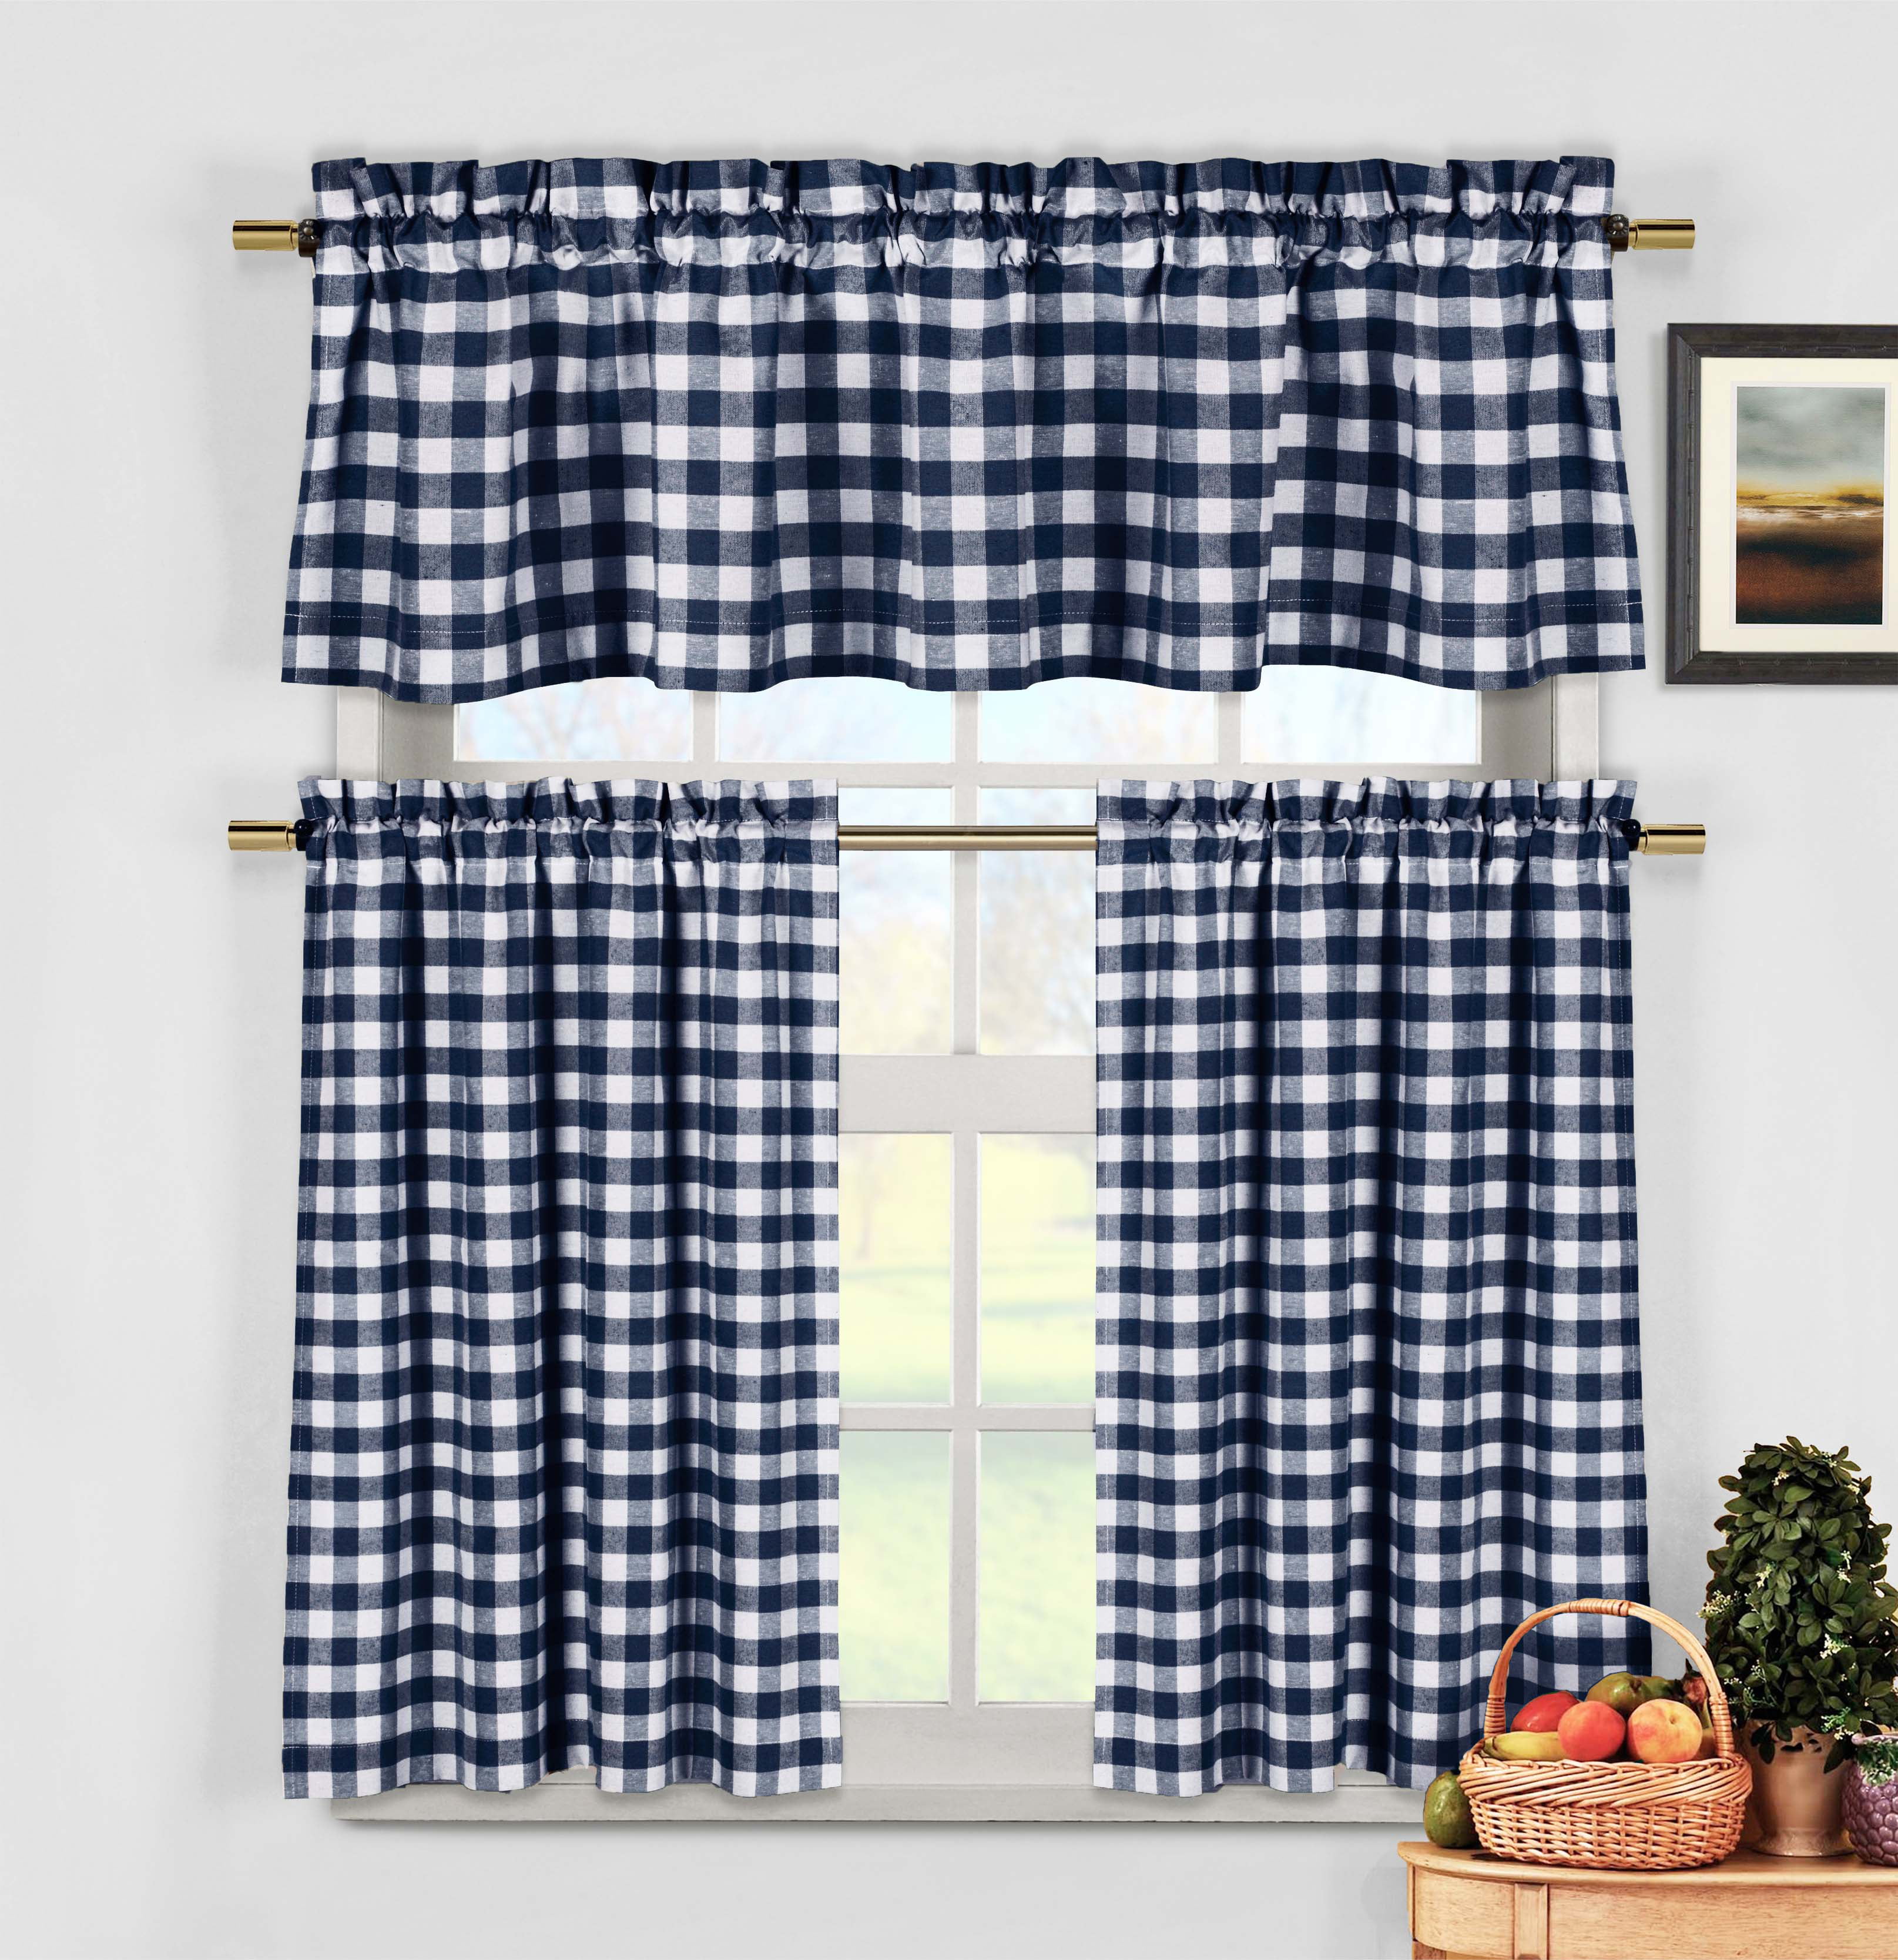 Matching 3 Piece Window Curtain Set 2 Tier Panels Taupe 3 Piece Gingham Check Kitchen Window Curtain Set: Plaid Cotton Rich Bathroom and More KWC-KINGSTON-CHECK-TAUPE-3154 1 Valance